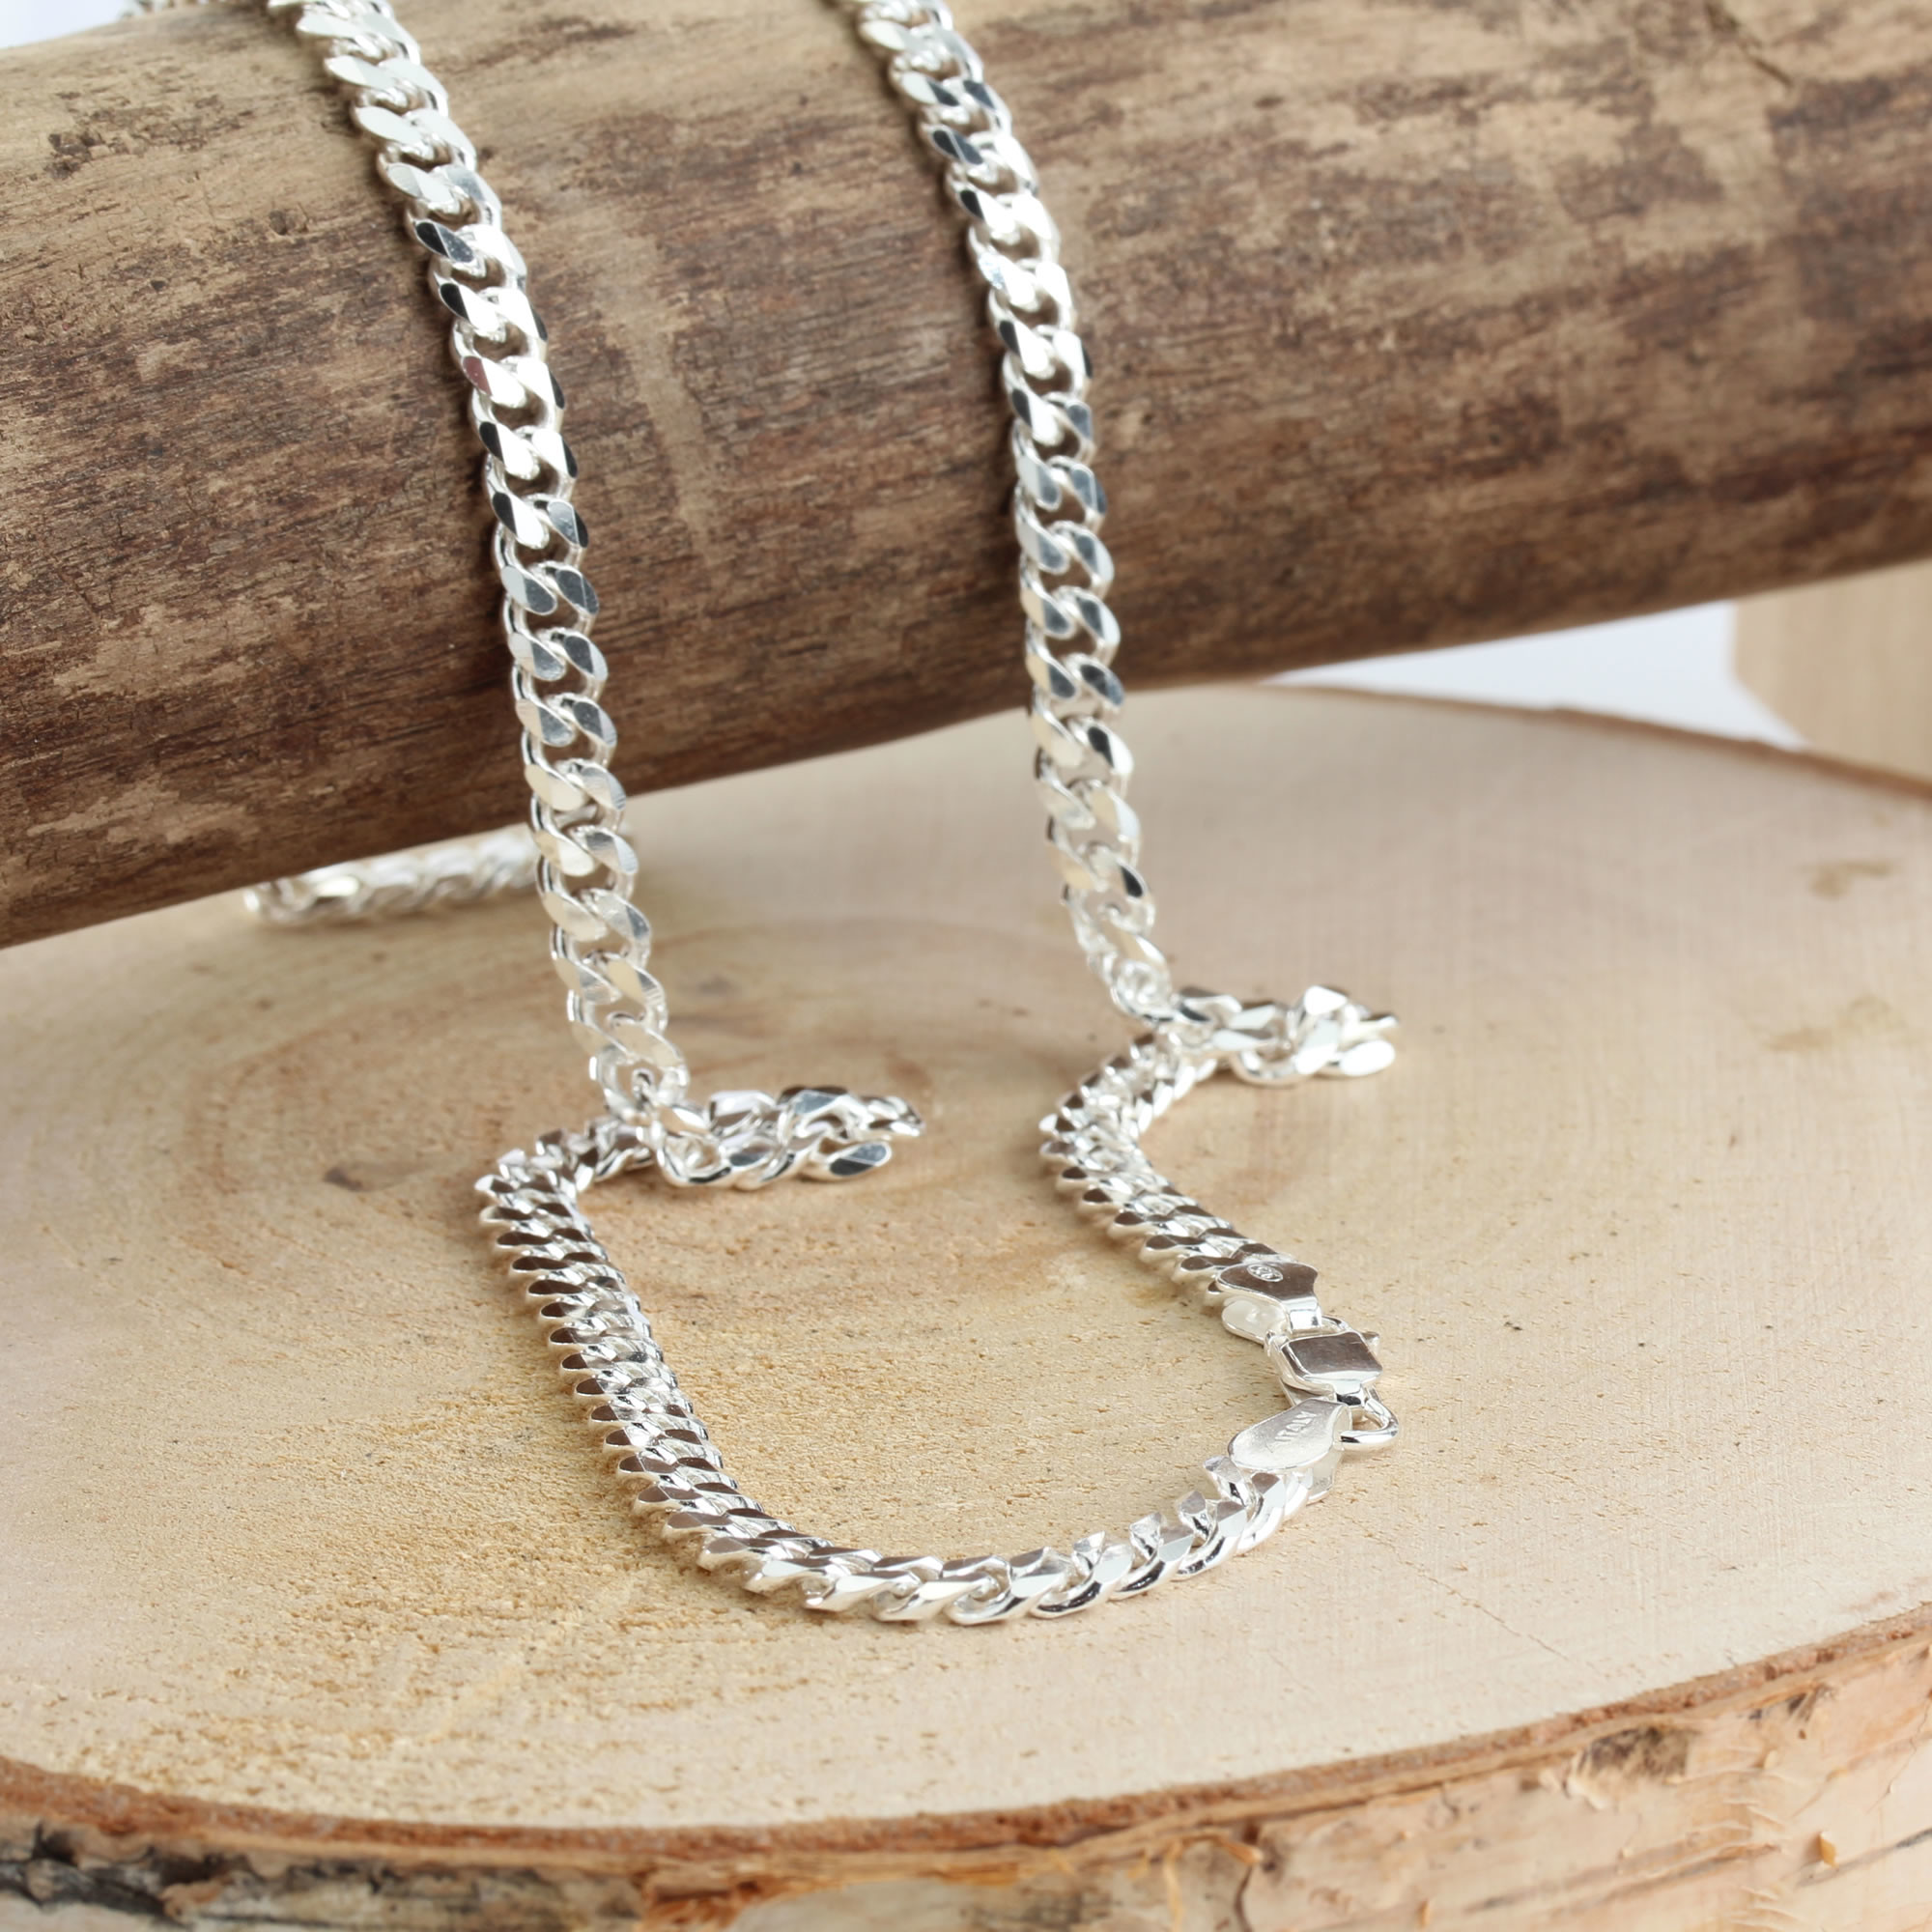 Solid Sterling Silver Curb Chain With Quality Lobster Clasp - 5.10mm Wide